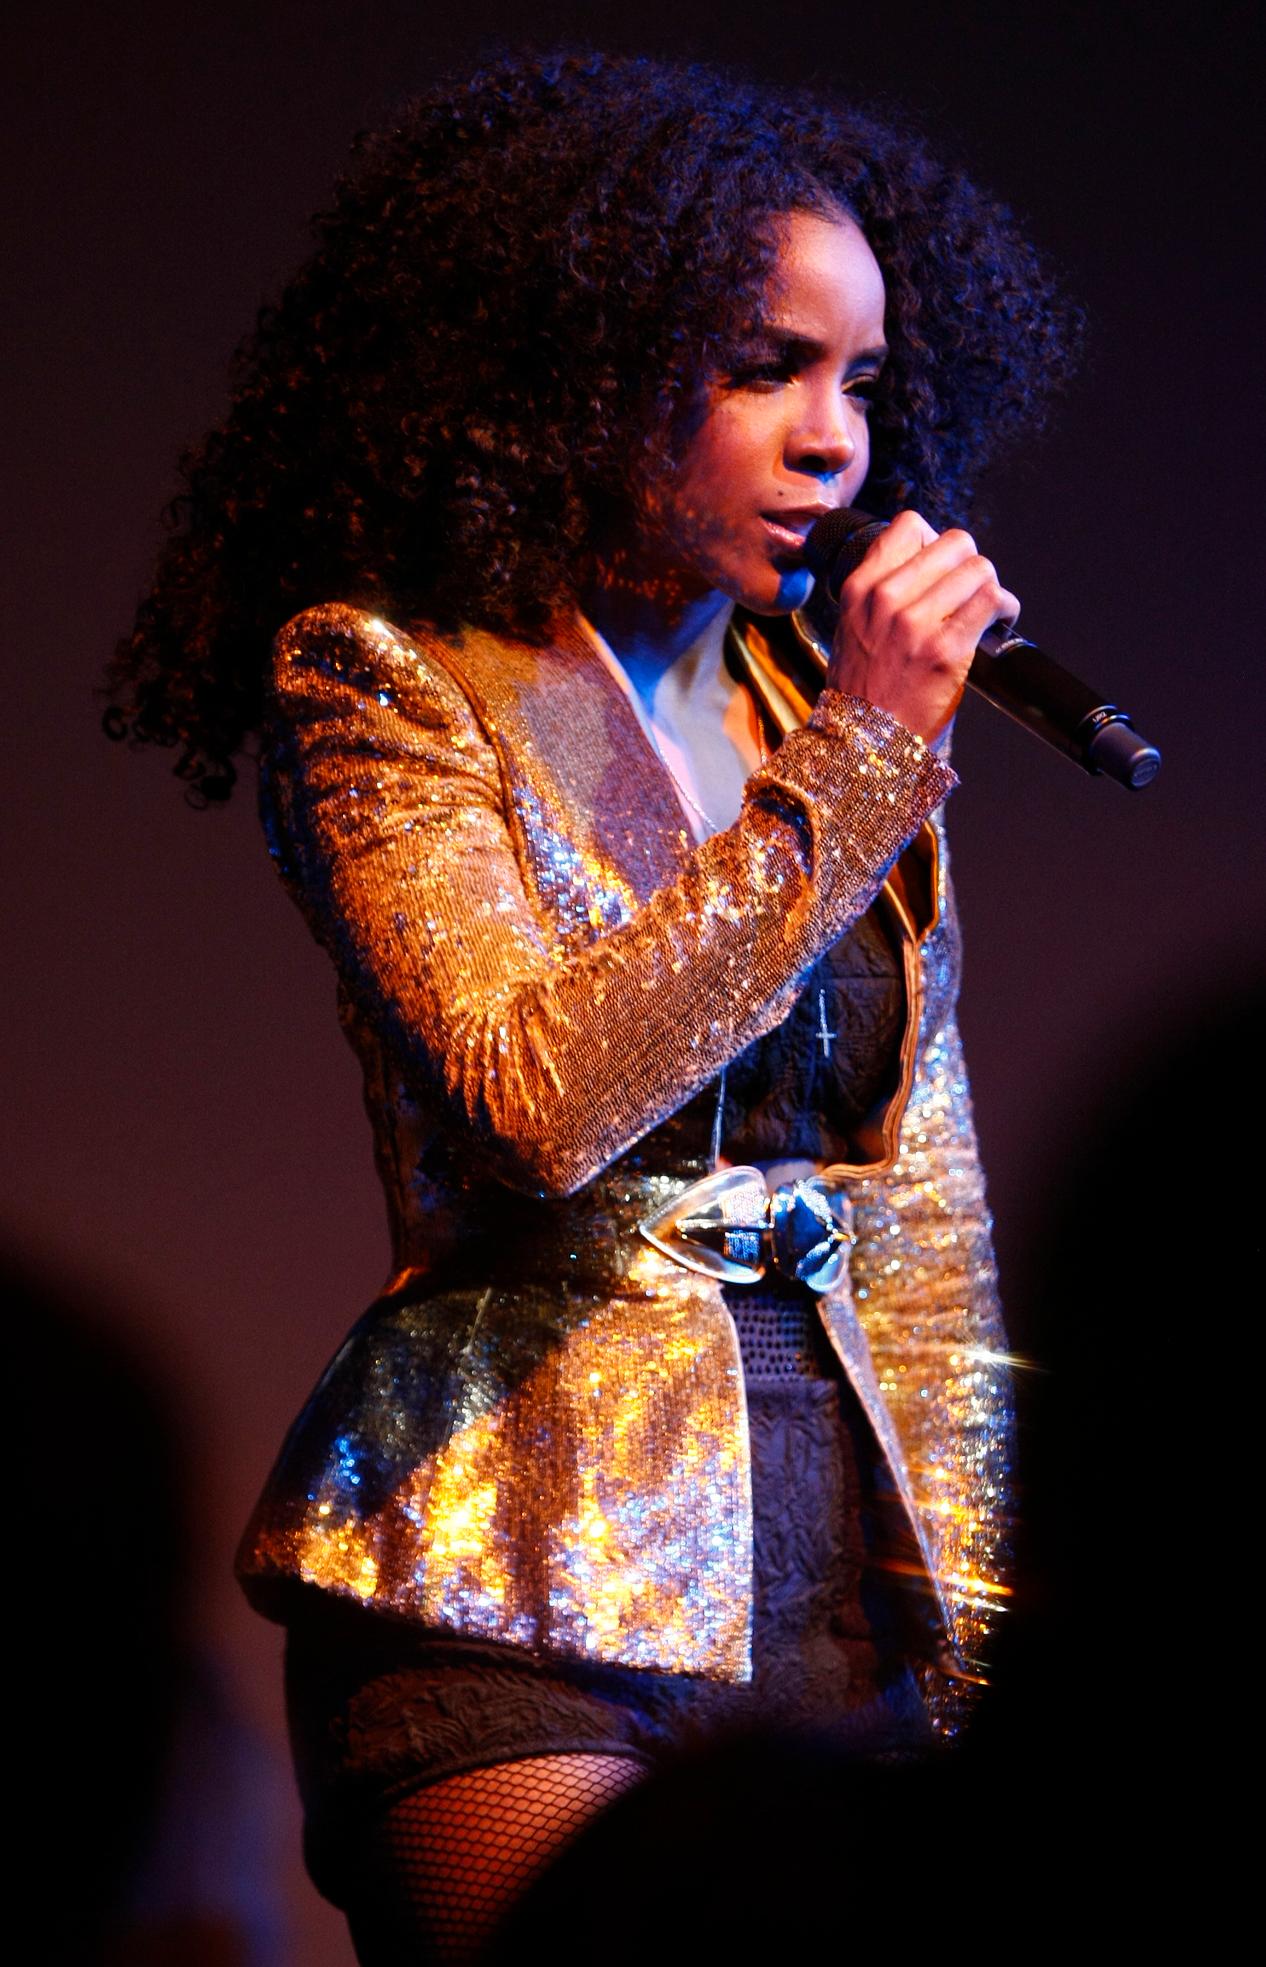 Kelly Rowland performs at the Fashions Heart Gala Ball in Perth